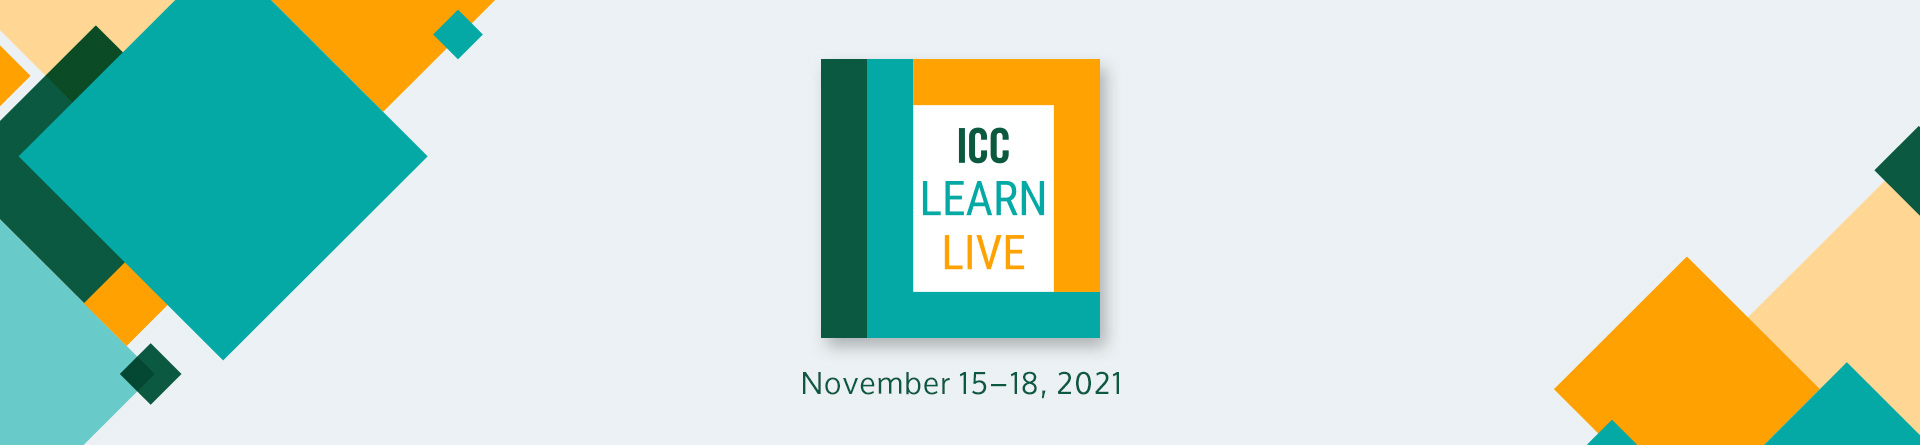 ICC Learn Live Schedule – 2021 Fall